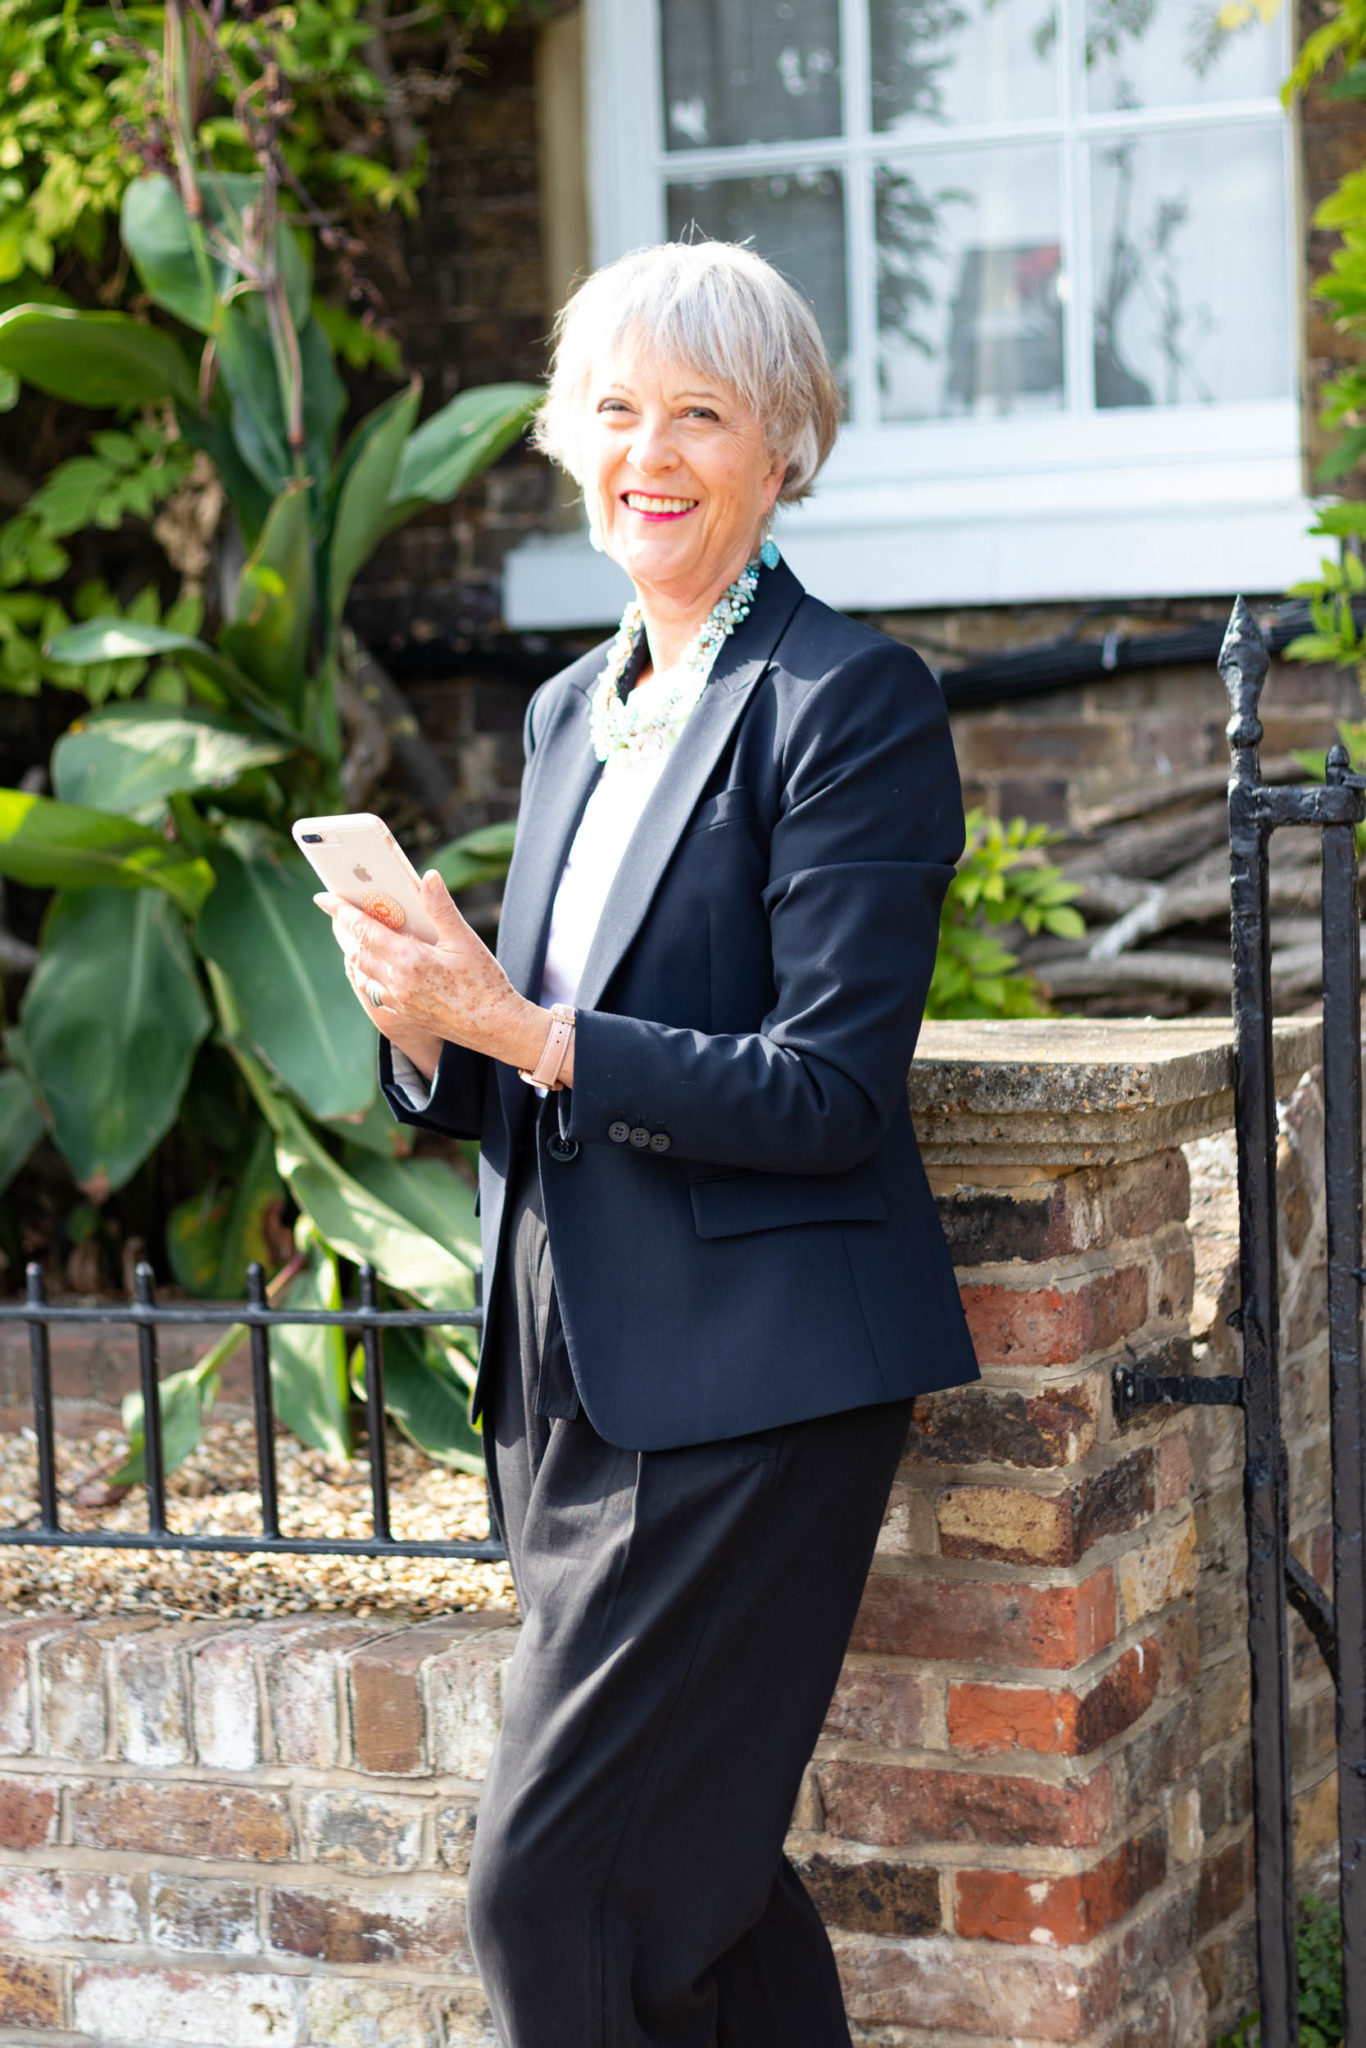 Classic navy jacket teamed with casual black trousers - Chic at any age